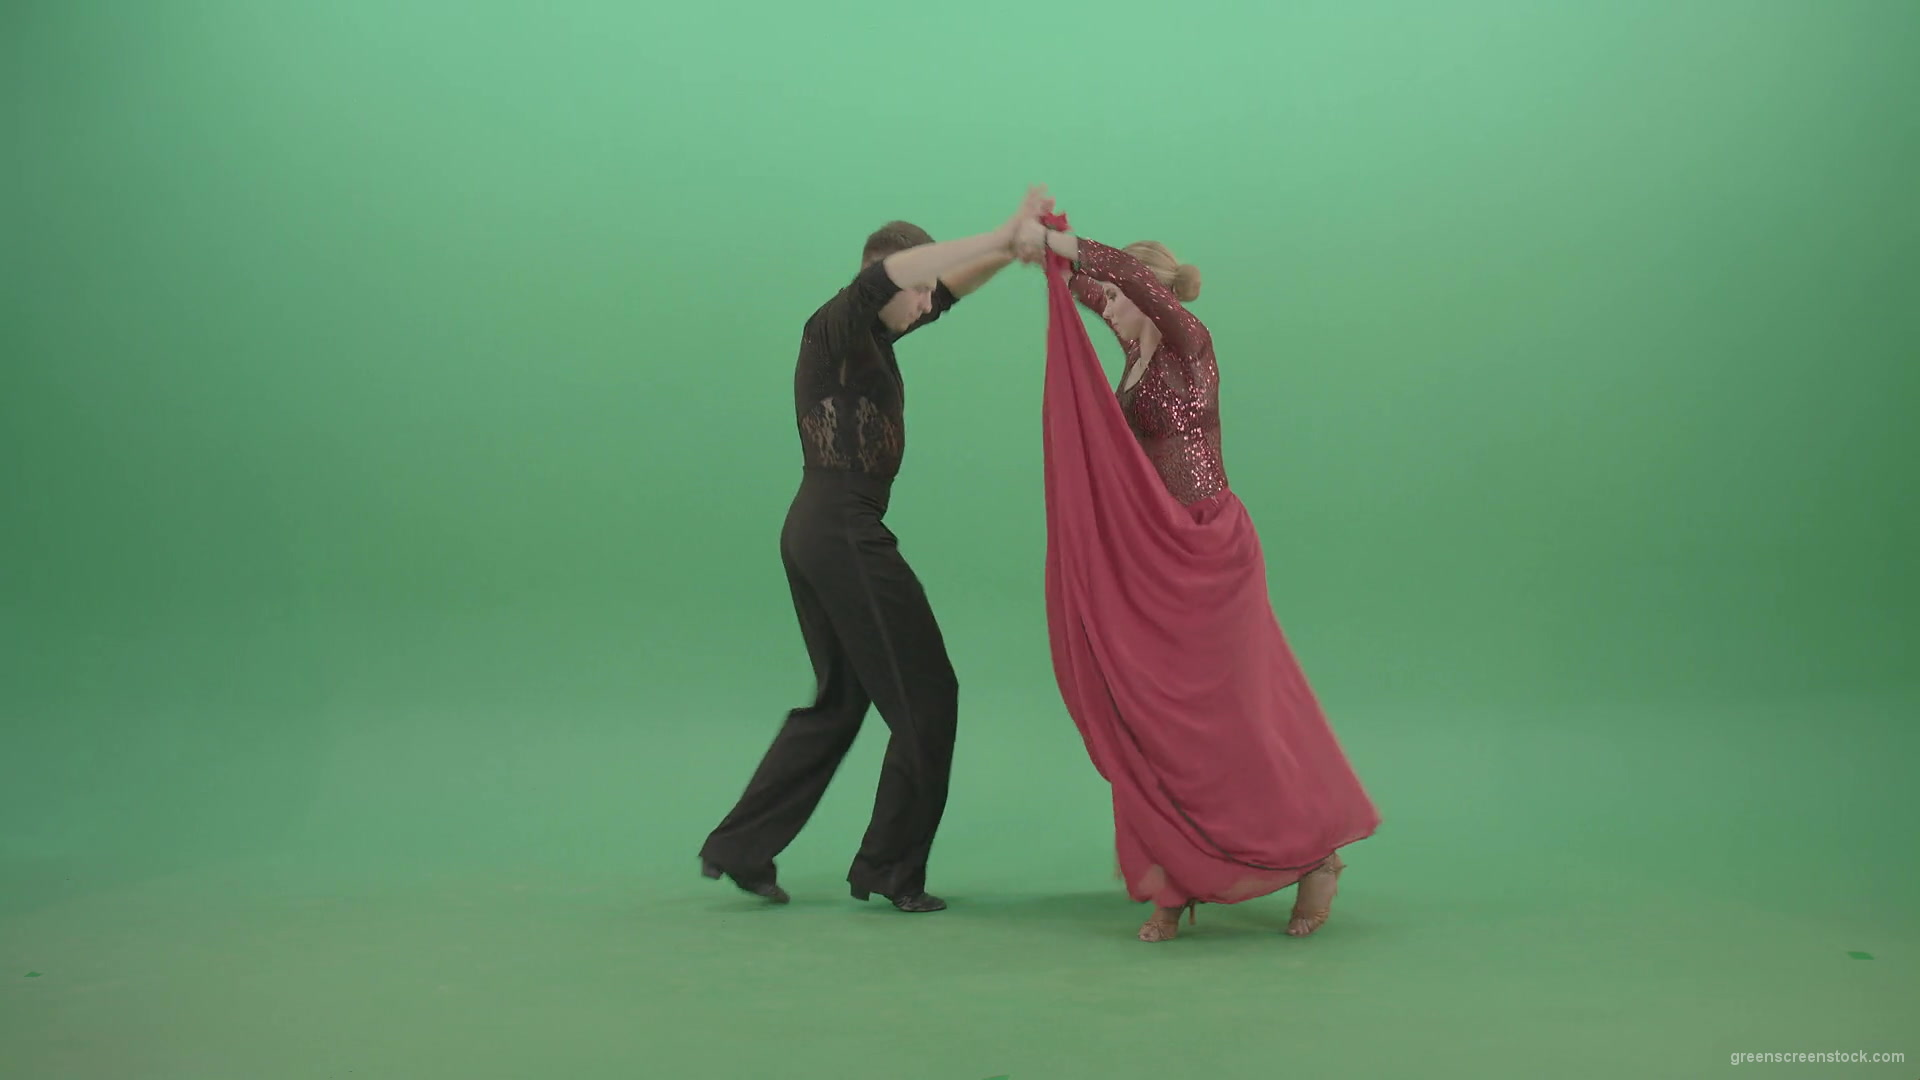 Passion-latino-ballroom-dance-by-lovely-couple-man-and-girl-isolated-on-green-screen-4K-Video-Footage-1920_008 Green Screen Stock